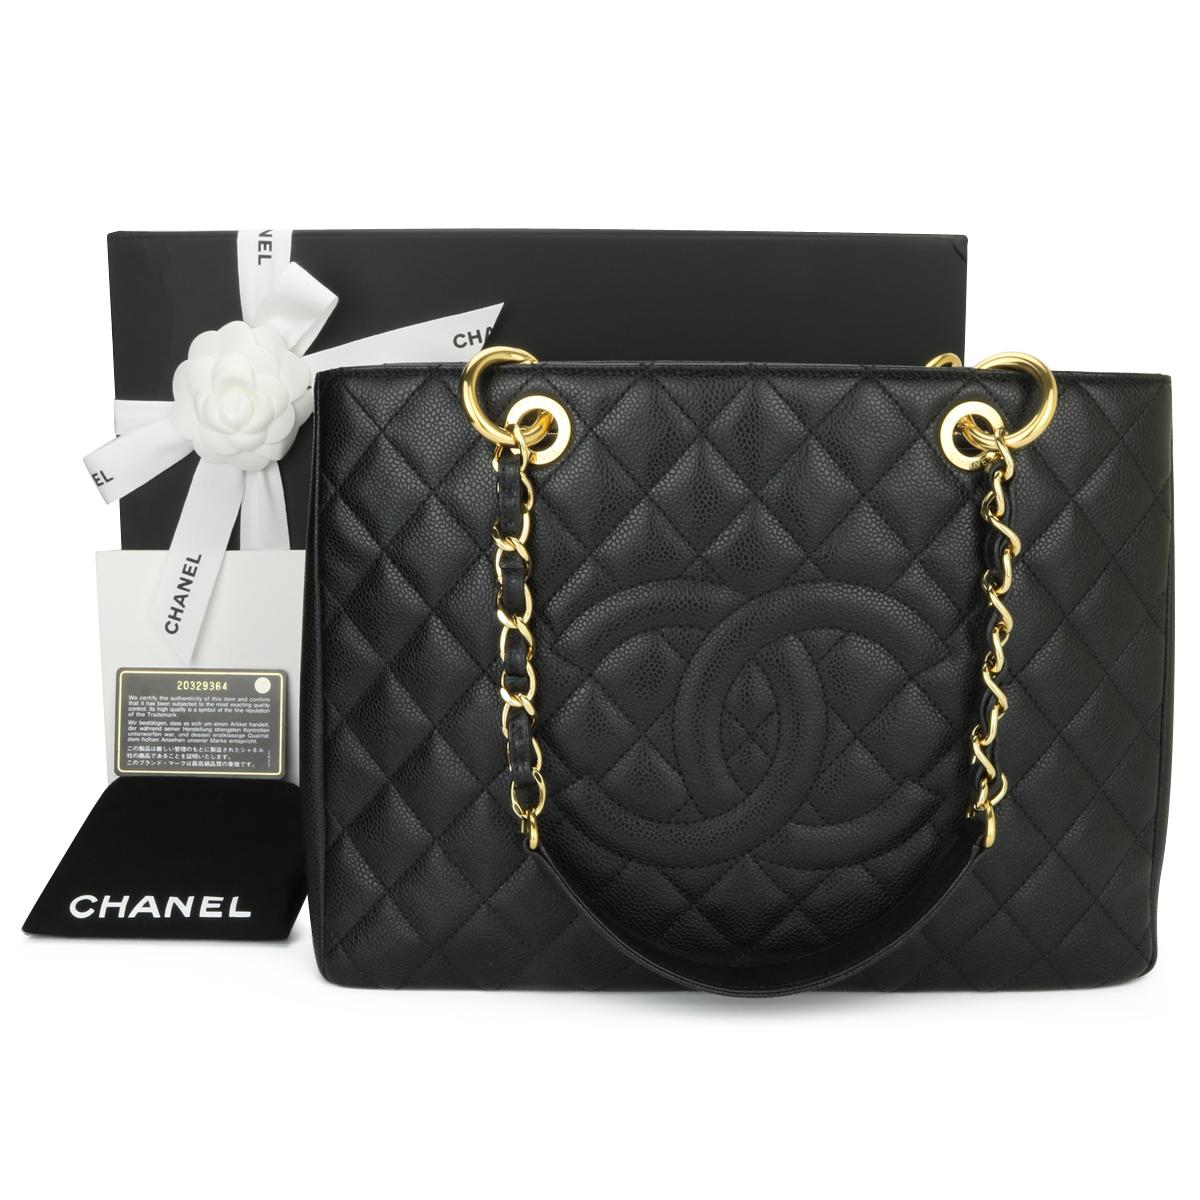 CHANEL Grand Shopping Tote (GST) Black Caviar with Gold Hardware 2015.

This bag is in excellent condition, the bag still holds its original shape, and the hardware is still very shiny.

As Chanel has discontinued the Grand Shopping Tote (GST), it